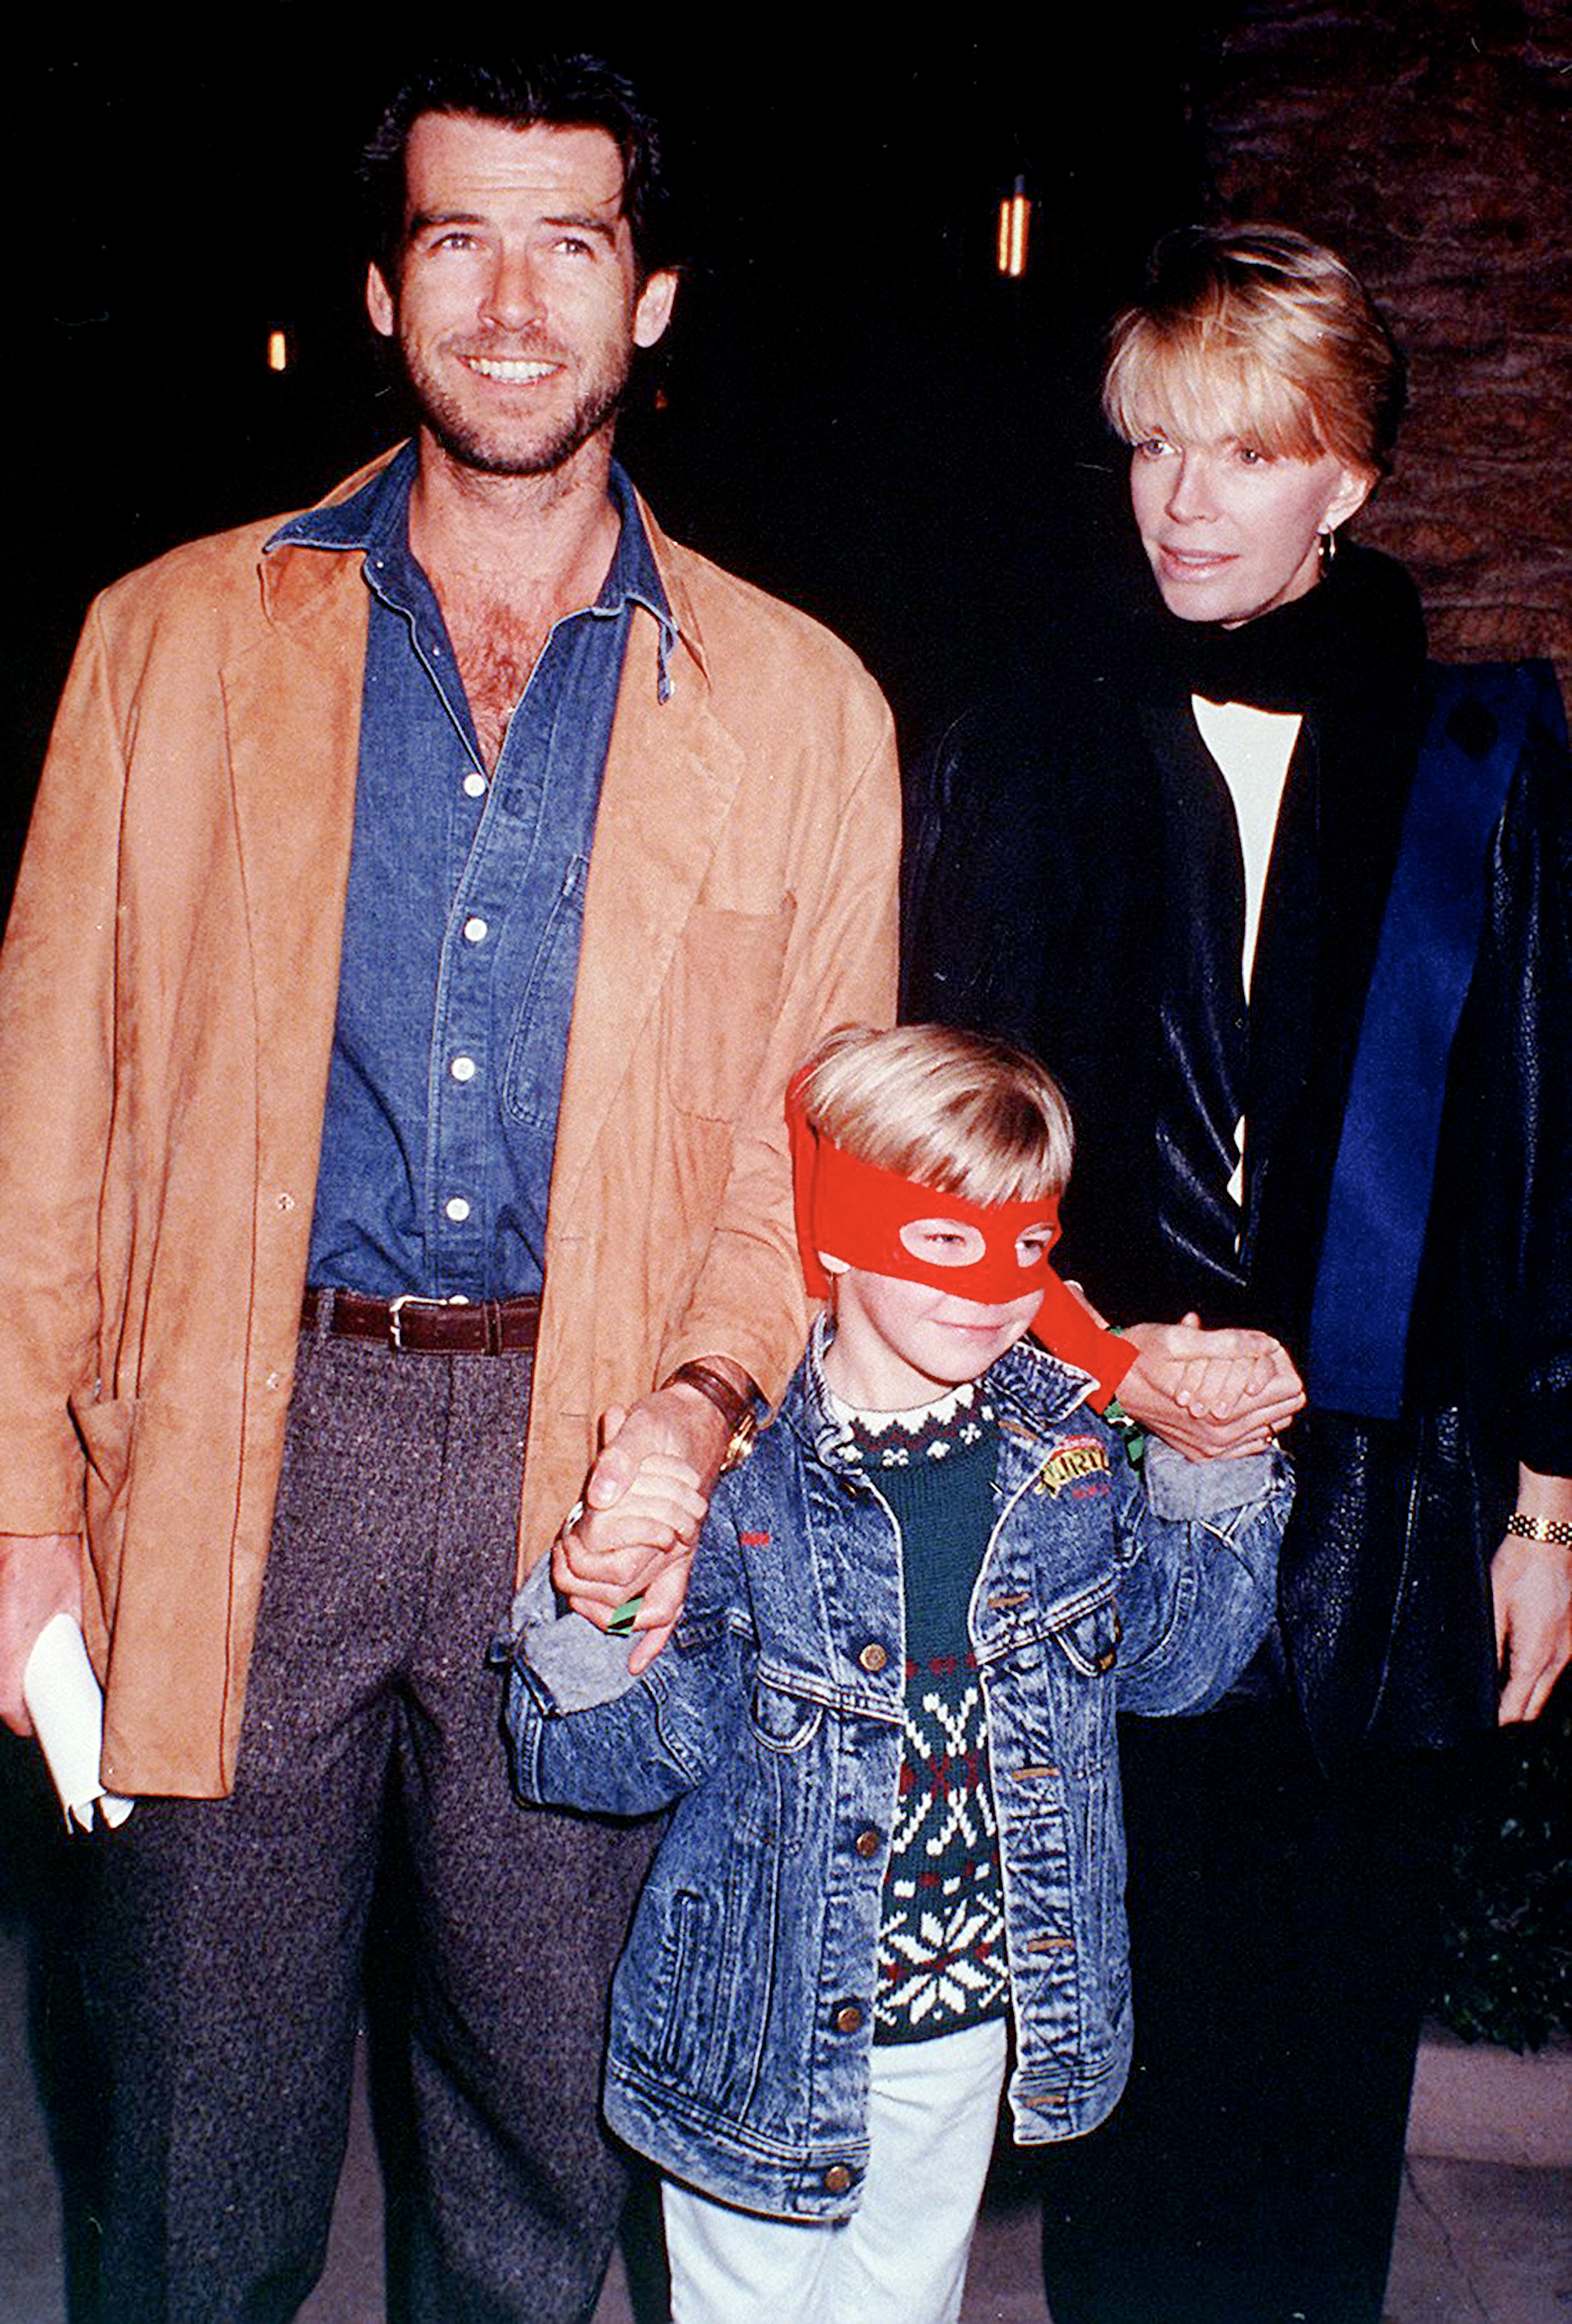 Irish actor Pierce Brosnan with his wife, actress Cassandra Harris (1948 - 1991) and their child, circa 1990. | Source: Getty Images